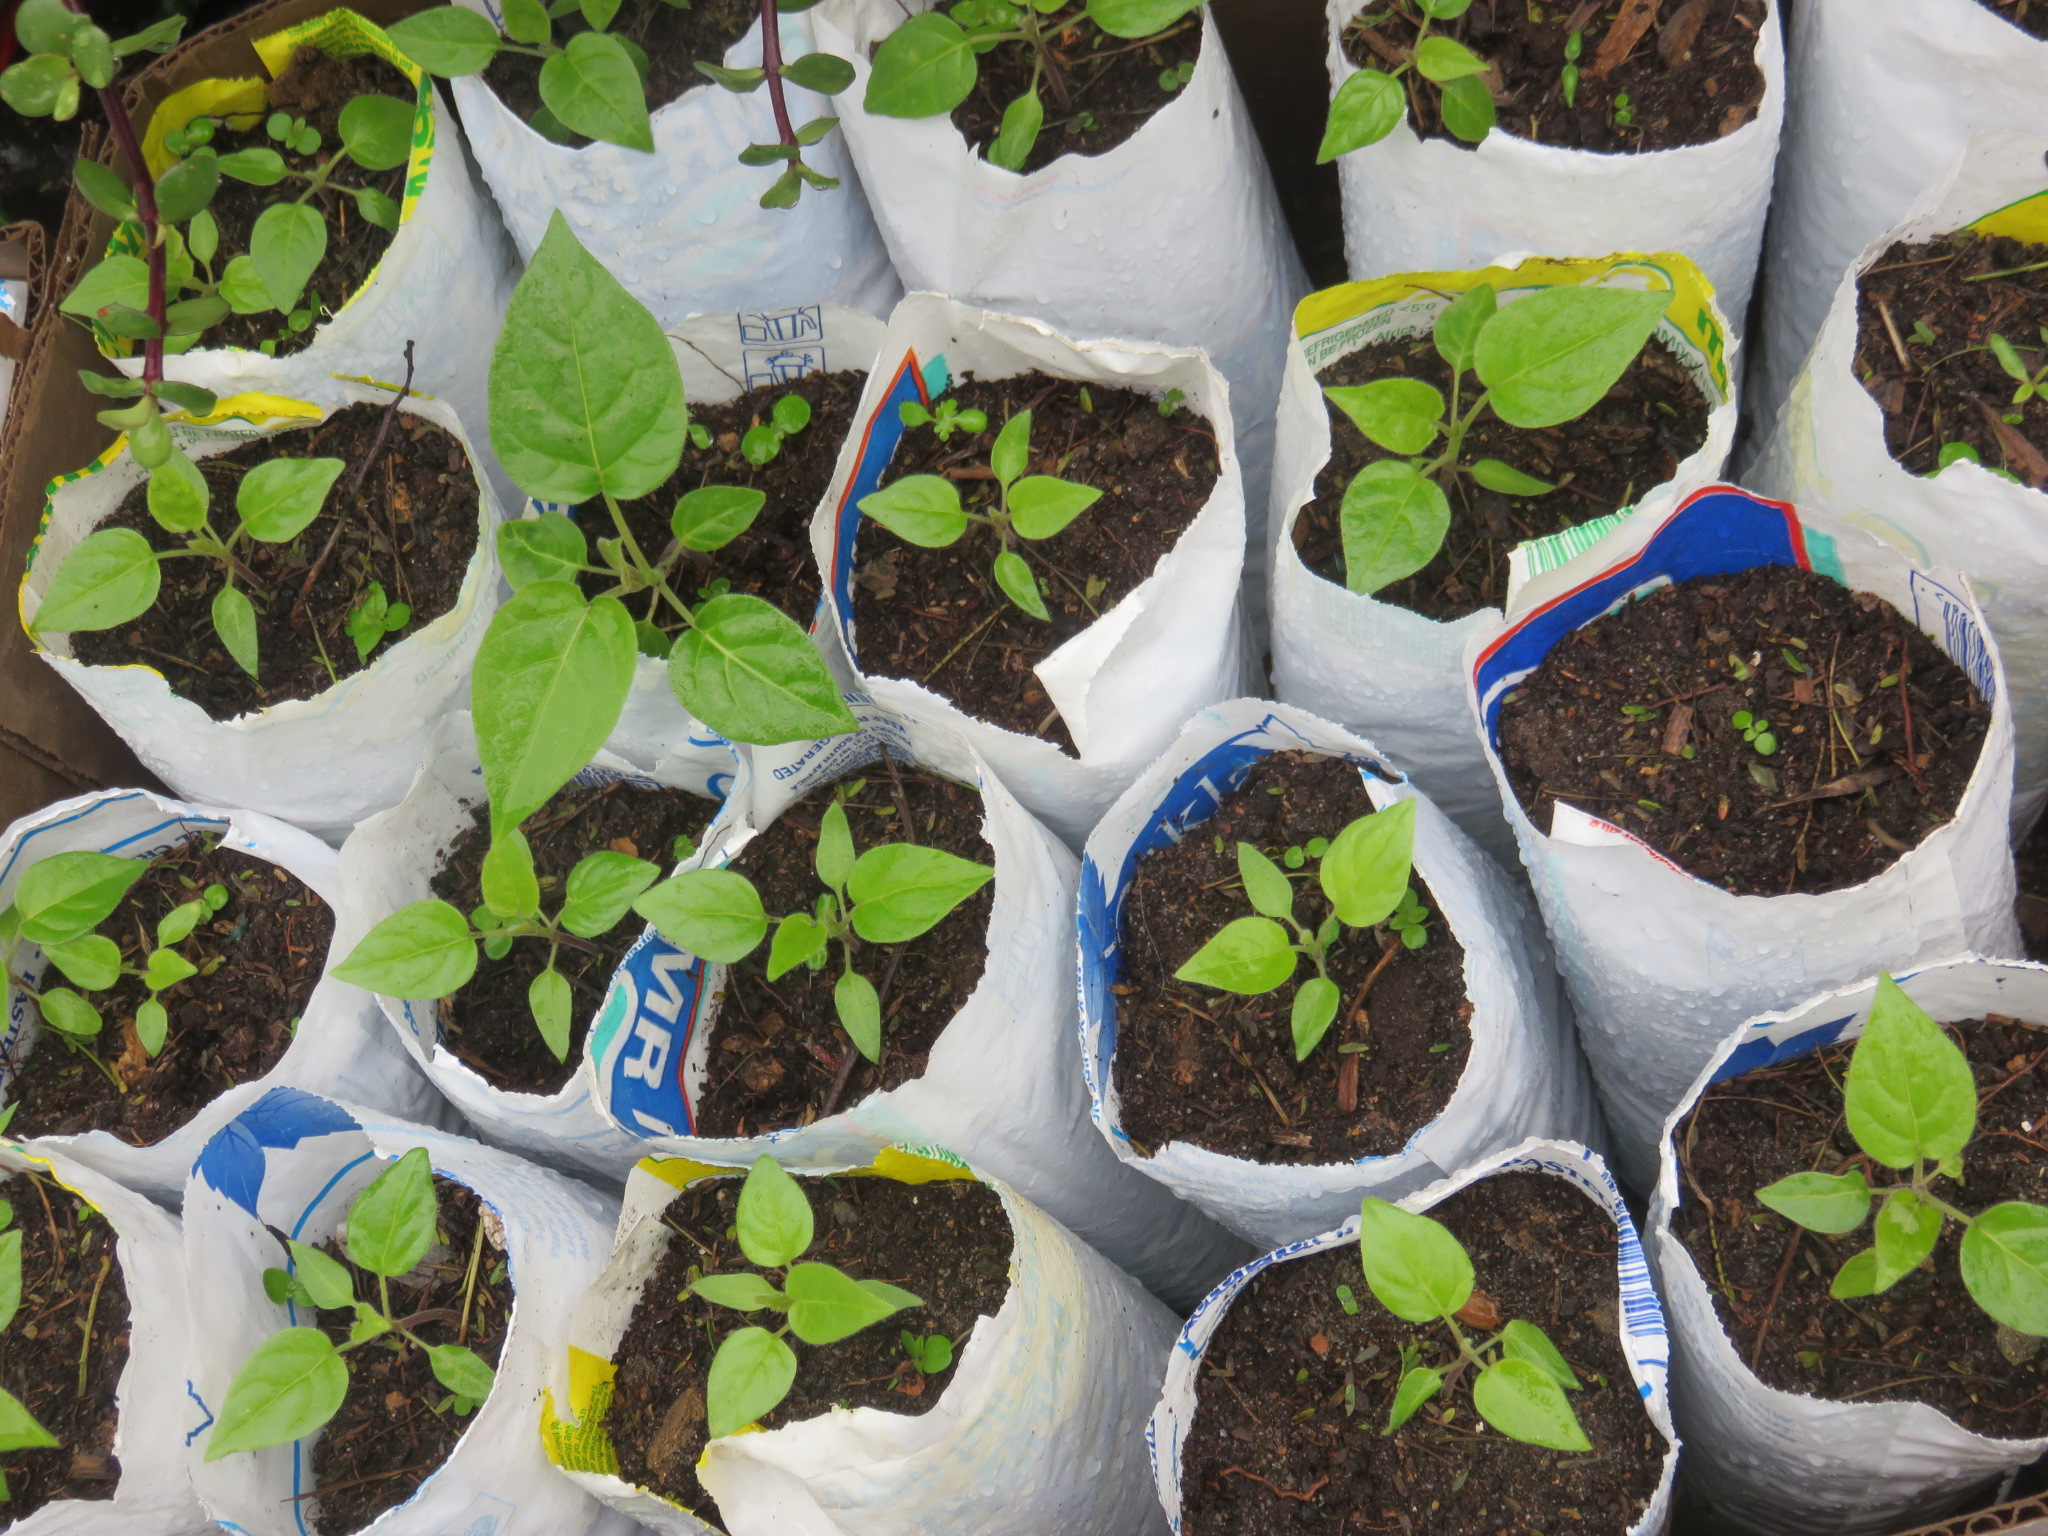 The next stage was to plant the seedlings individually in recycled milk bags. After this they were planted out in the garden.